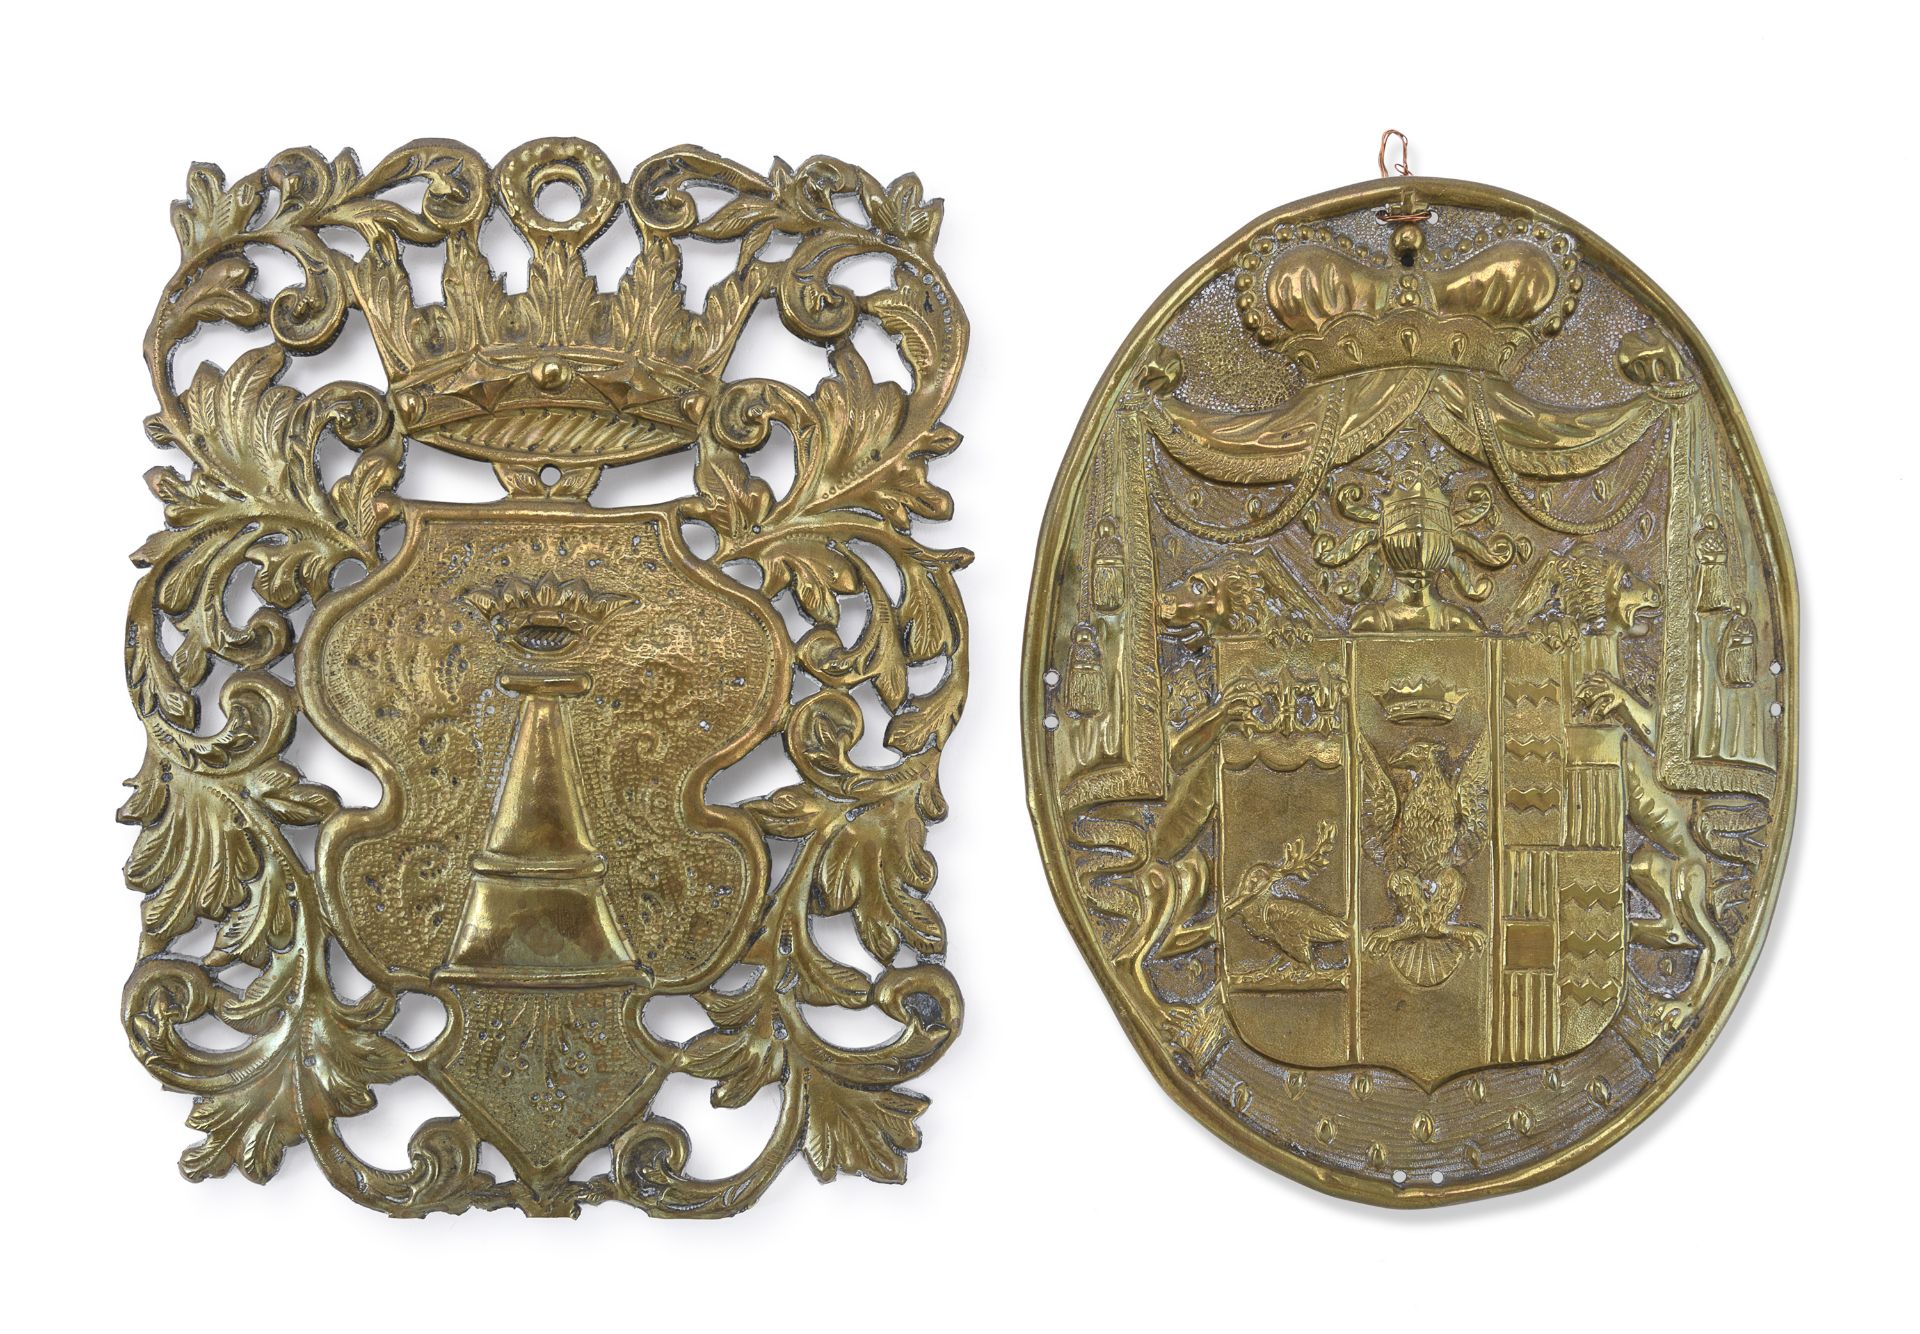 TWO BRASS HOUSE COATS END OF THE 18TH CENTURY